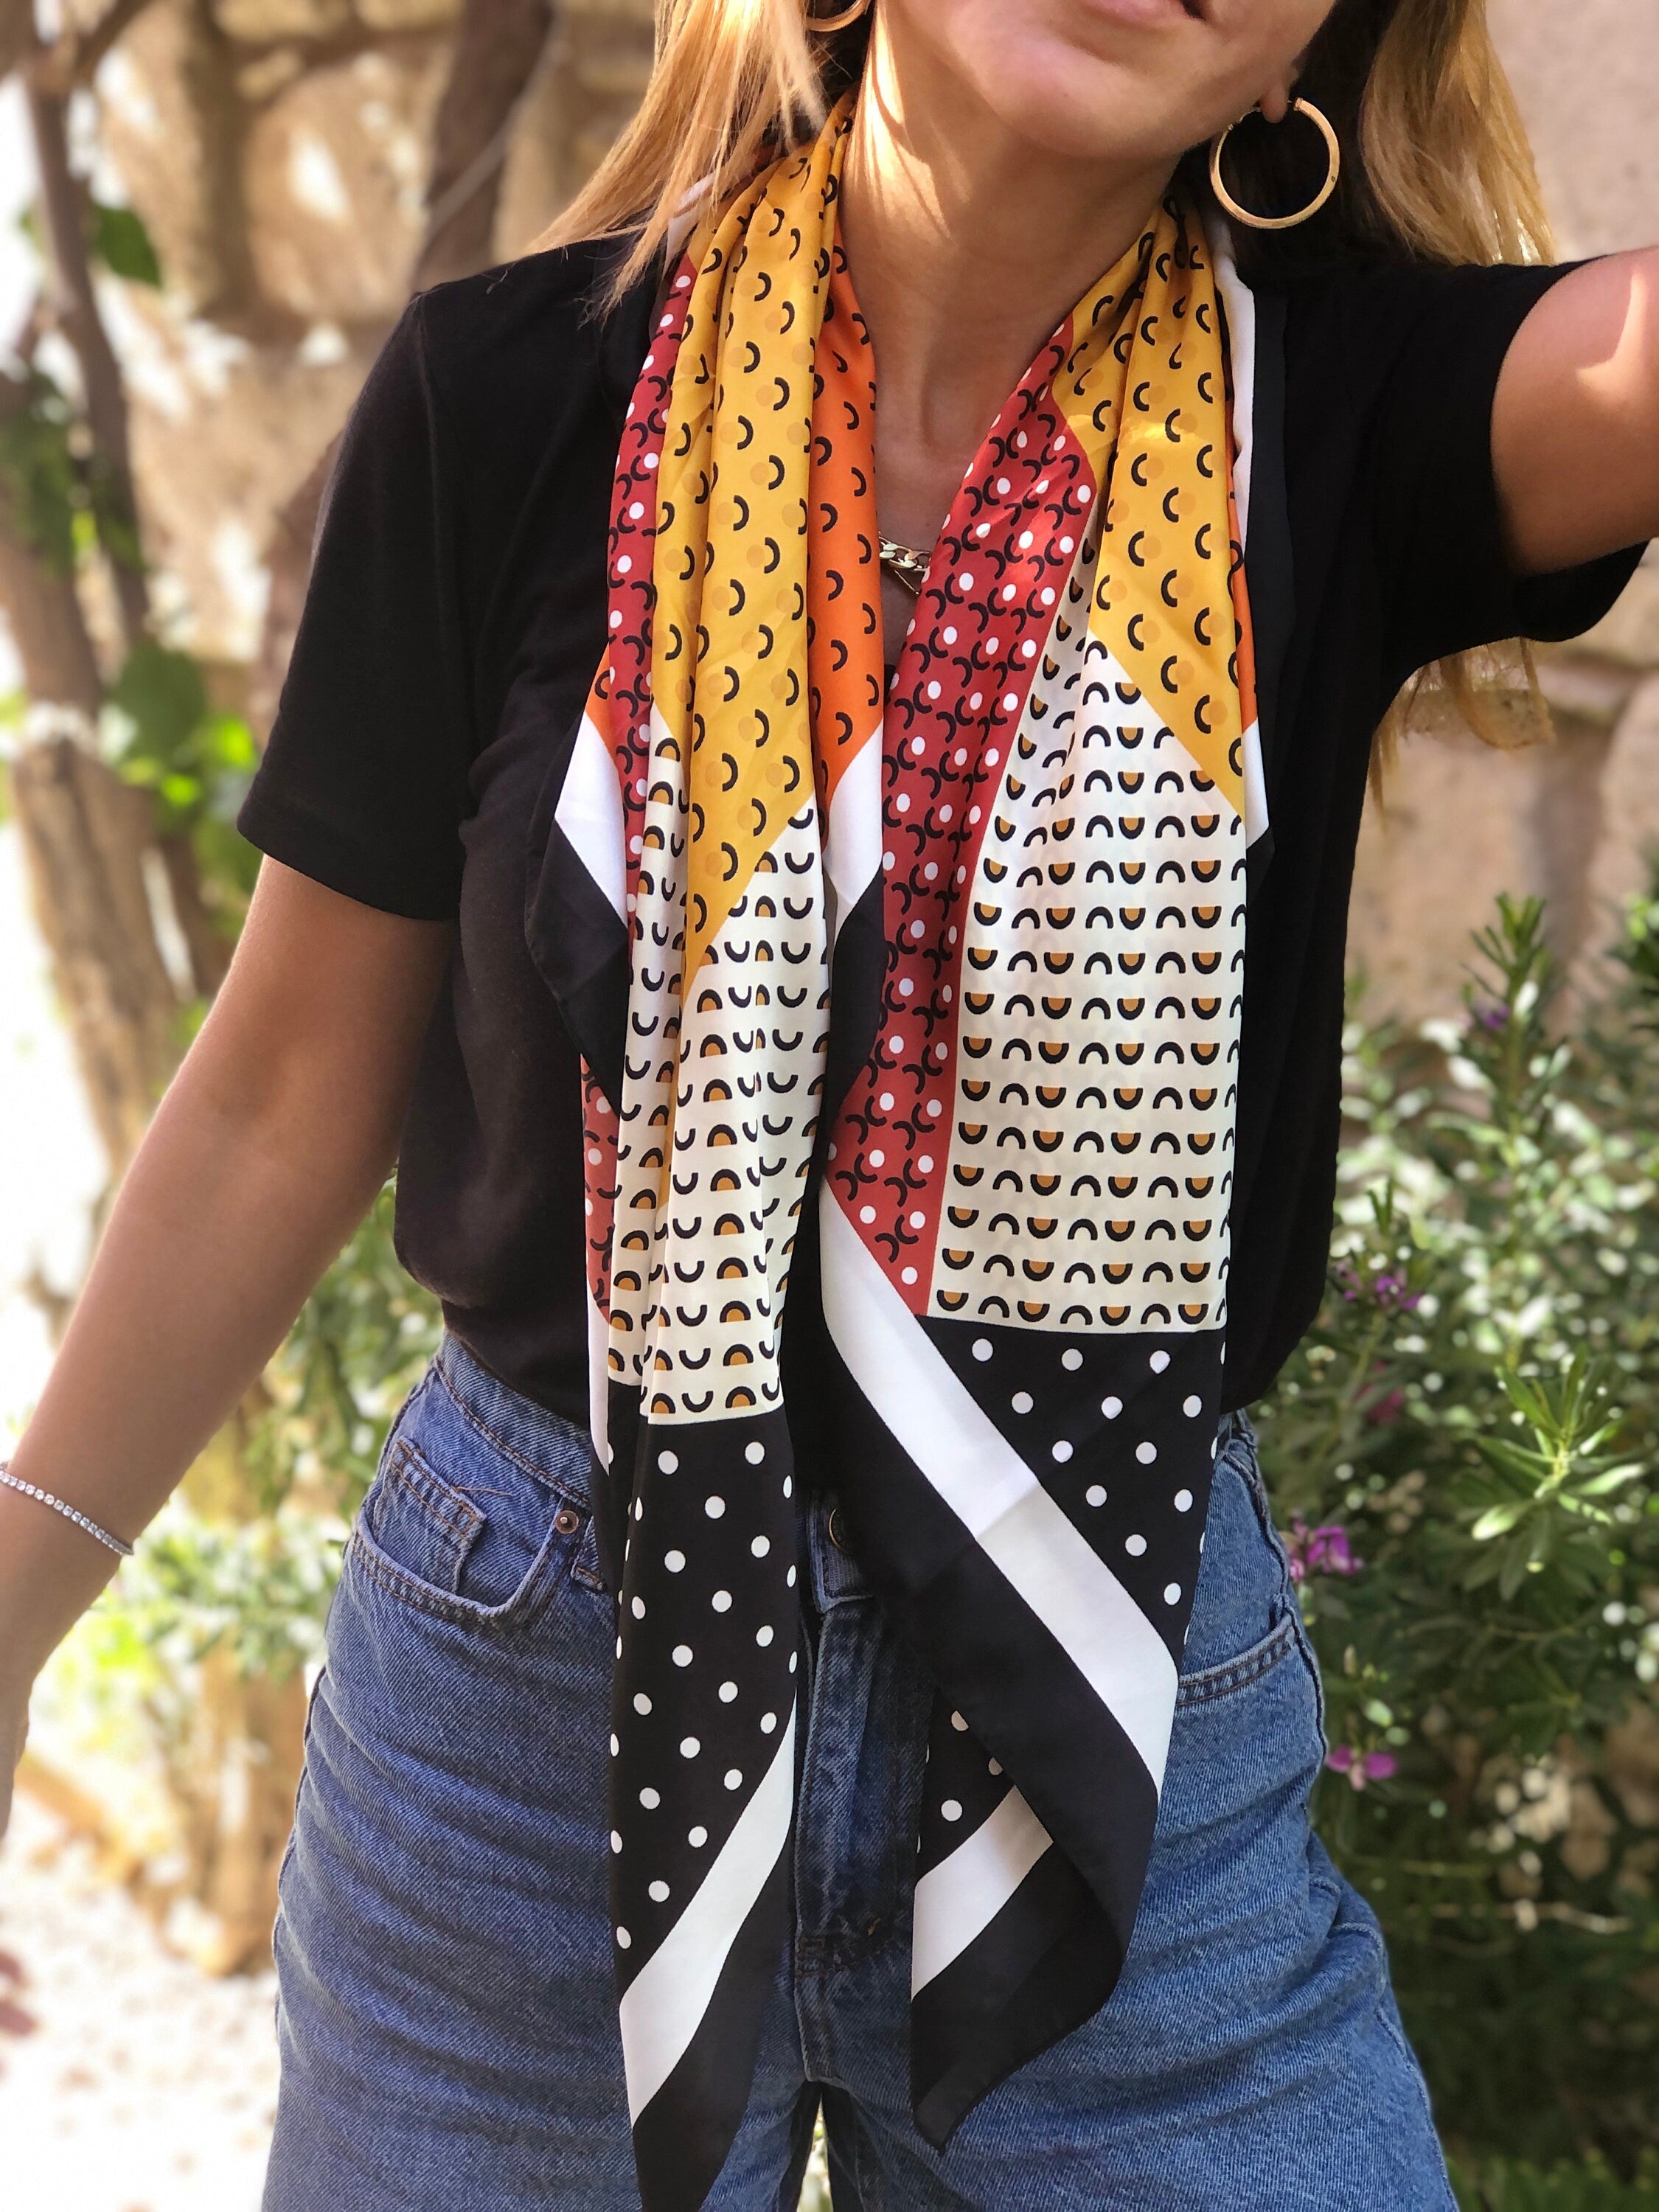 Get the best gift for women this year - a handmade satin scarf! These unique and stylish scarves are perfect for any occasion, and they are made with love and care.